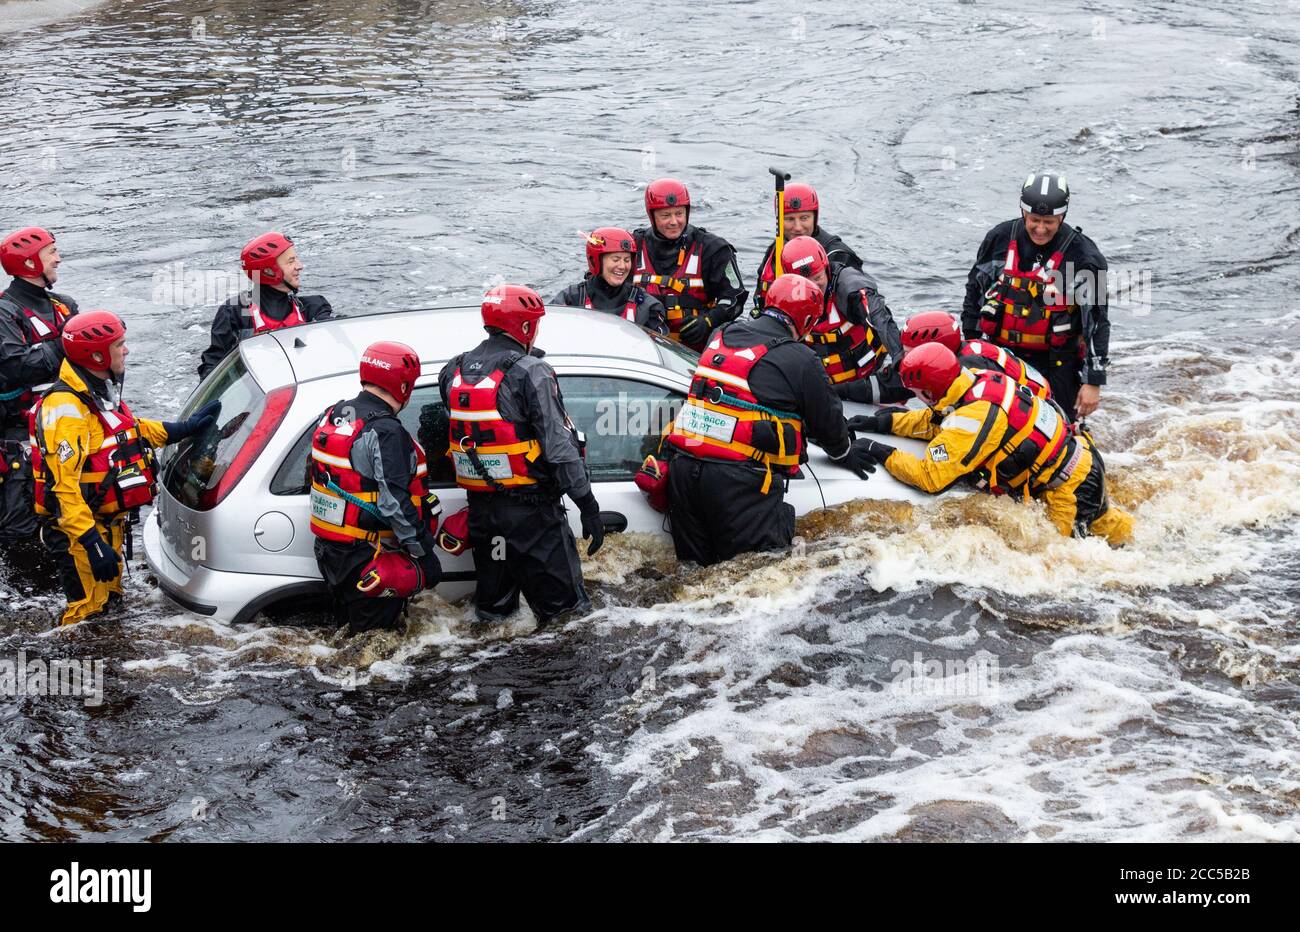 Ambulance services training for extreme weather/flooding conditions at Tees Barrage in Stockton on Tees. UK Stock Photo